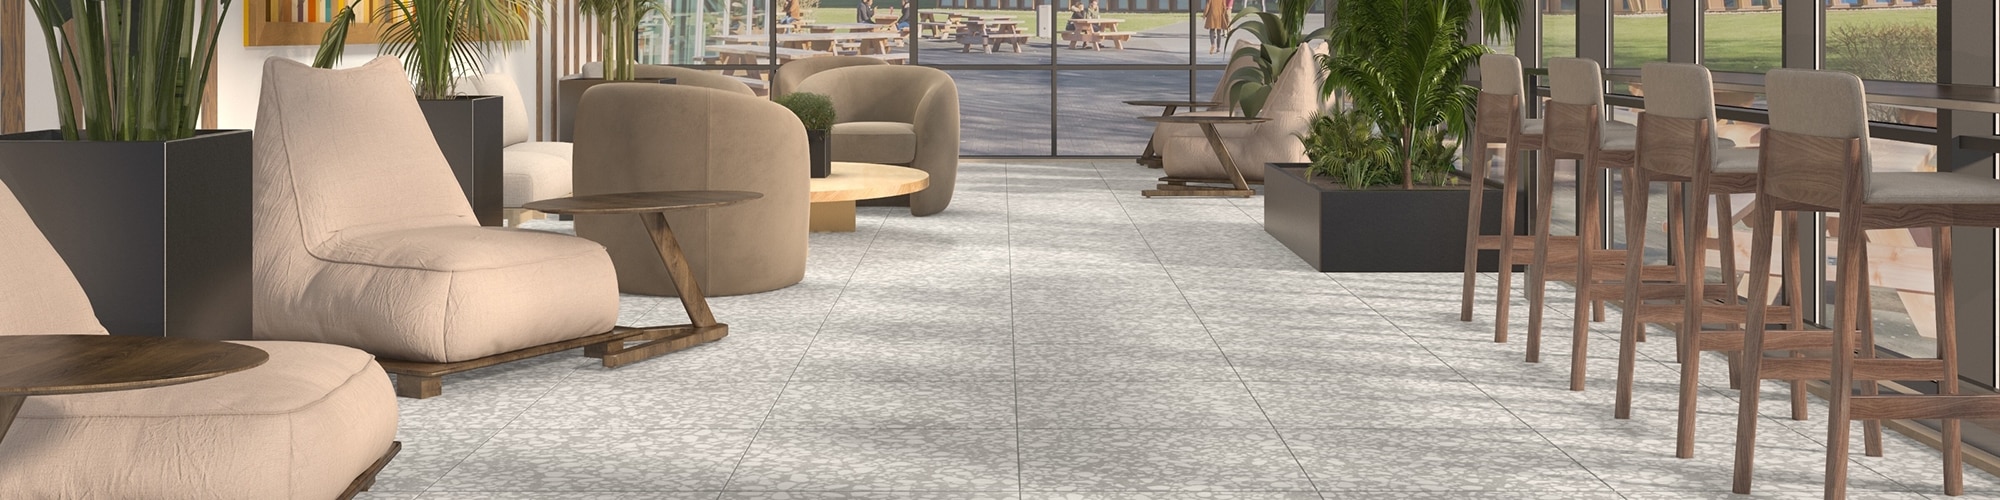 Student center sunroom with gray floor tile that looks like terrazzo, beige over-stuffed chairs with side tables, and beige barstools facing ceiling-to-floor windows.